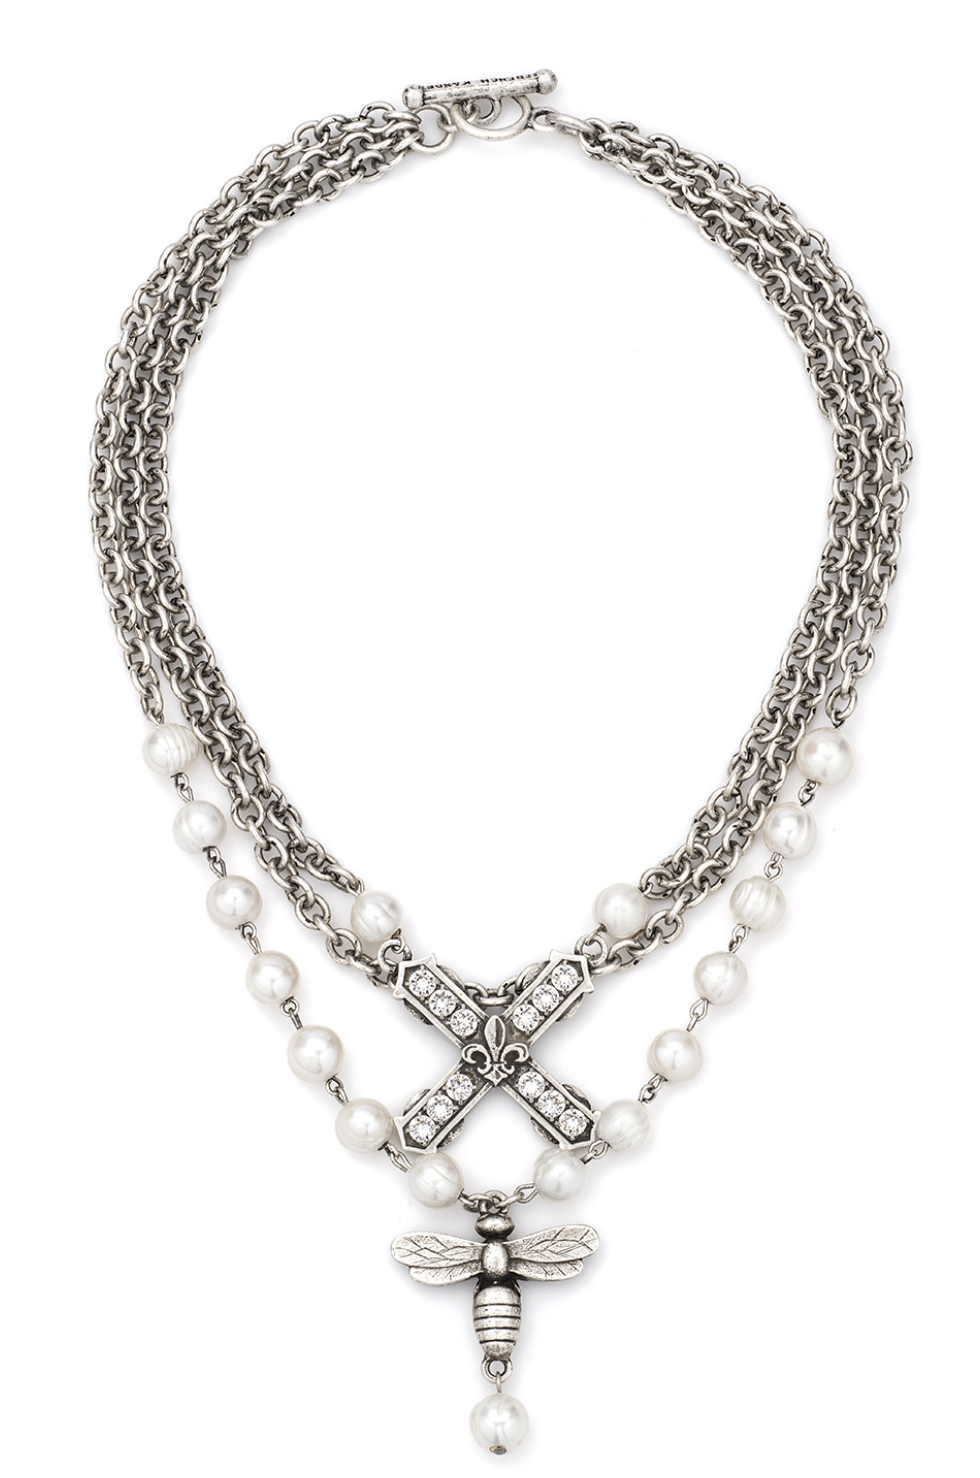 Triple Strand Pearls with Silver Wire and Chain Crystal Necklace